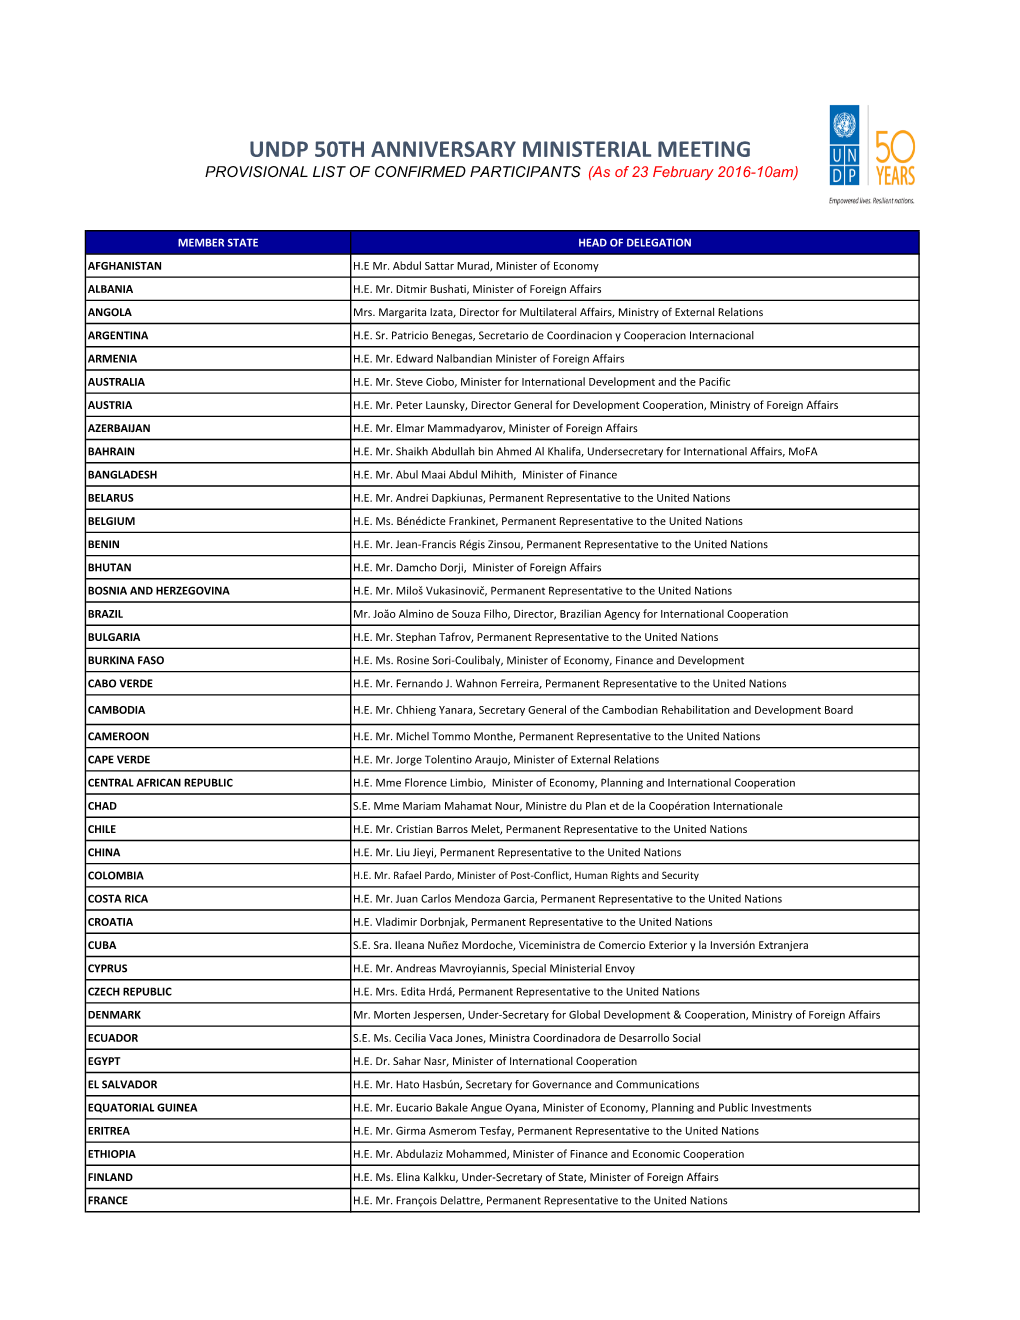 UNDP 50TH ANNIVERSARY MINISTERIAL MEETING PROVISIONAL LIST of CONFIRMED PARTICIPANTS (As of 23 February 2016-10Am)